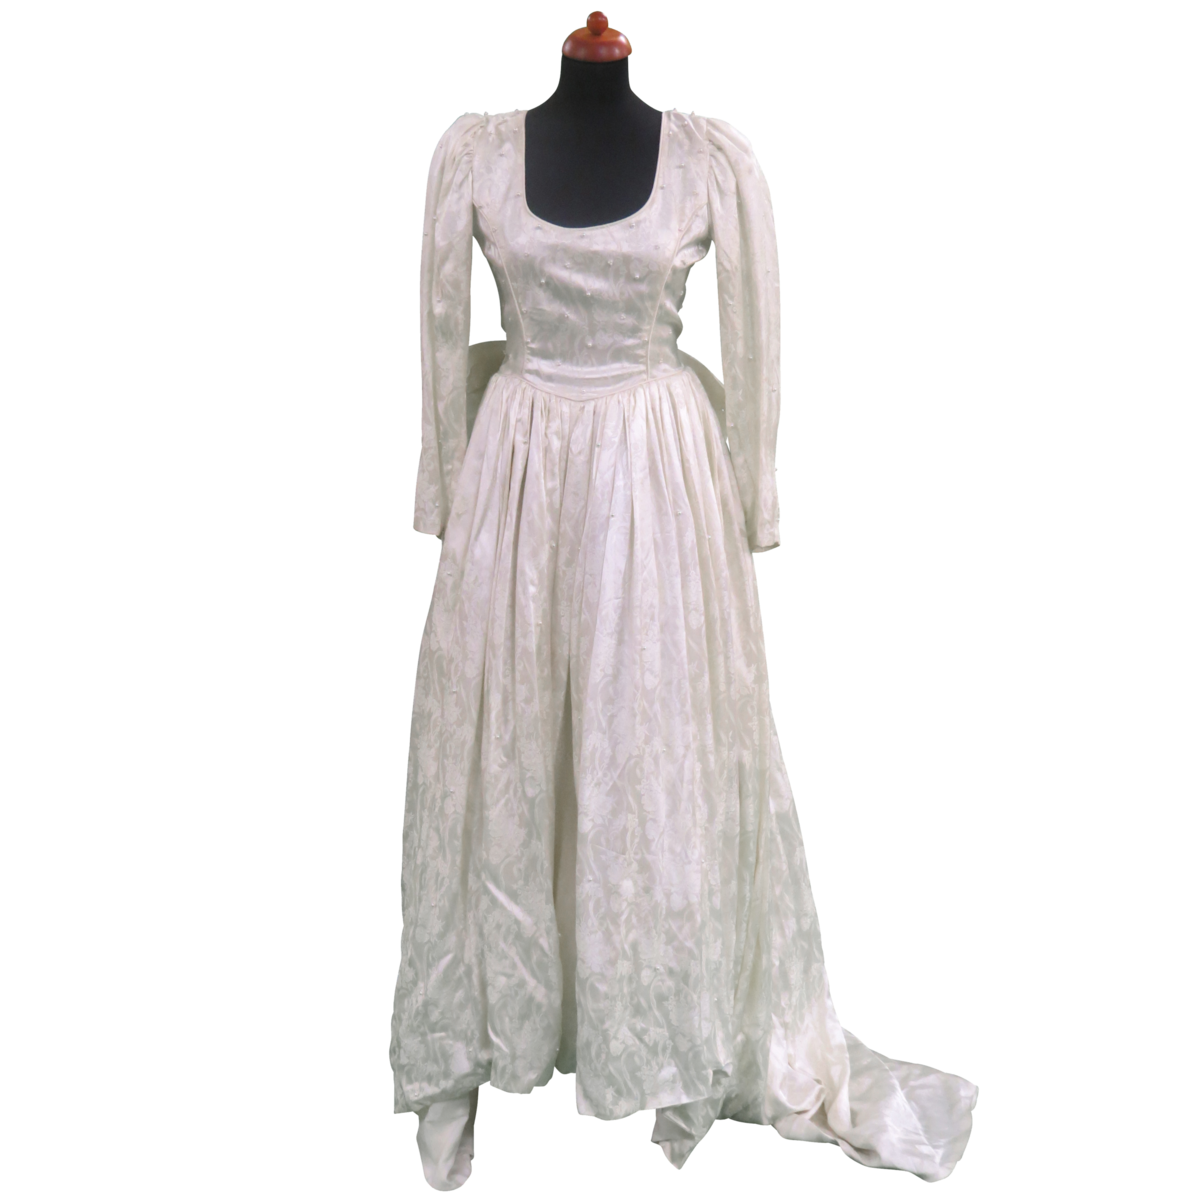 Wedding-Dress from the "Like A Virgin" Tour 1985 Worn by Madonna